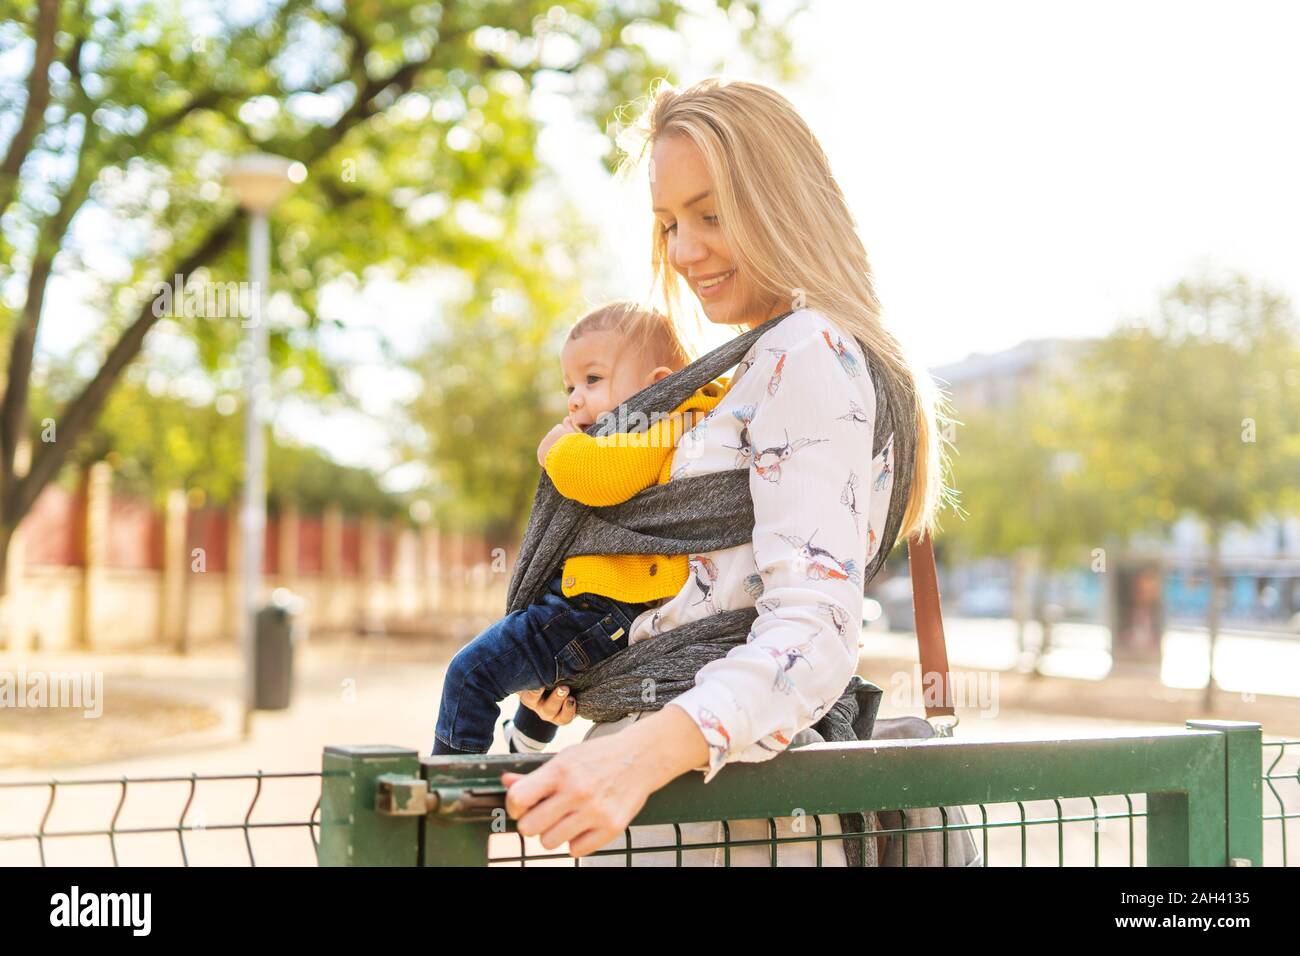 Mother carrying baby boy in a sling opening a gate Stock Photo